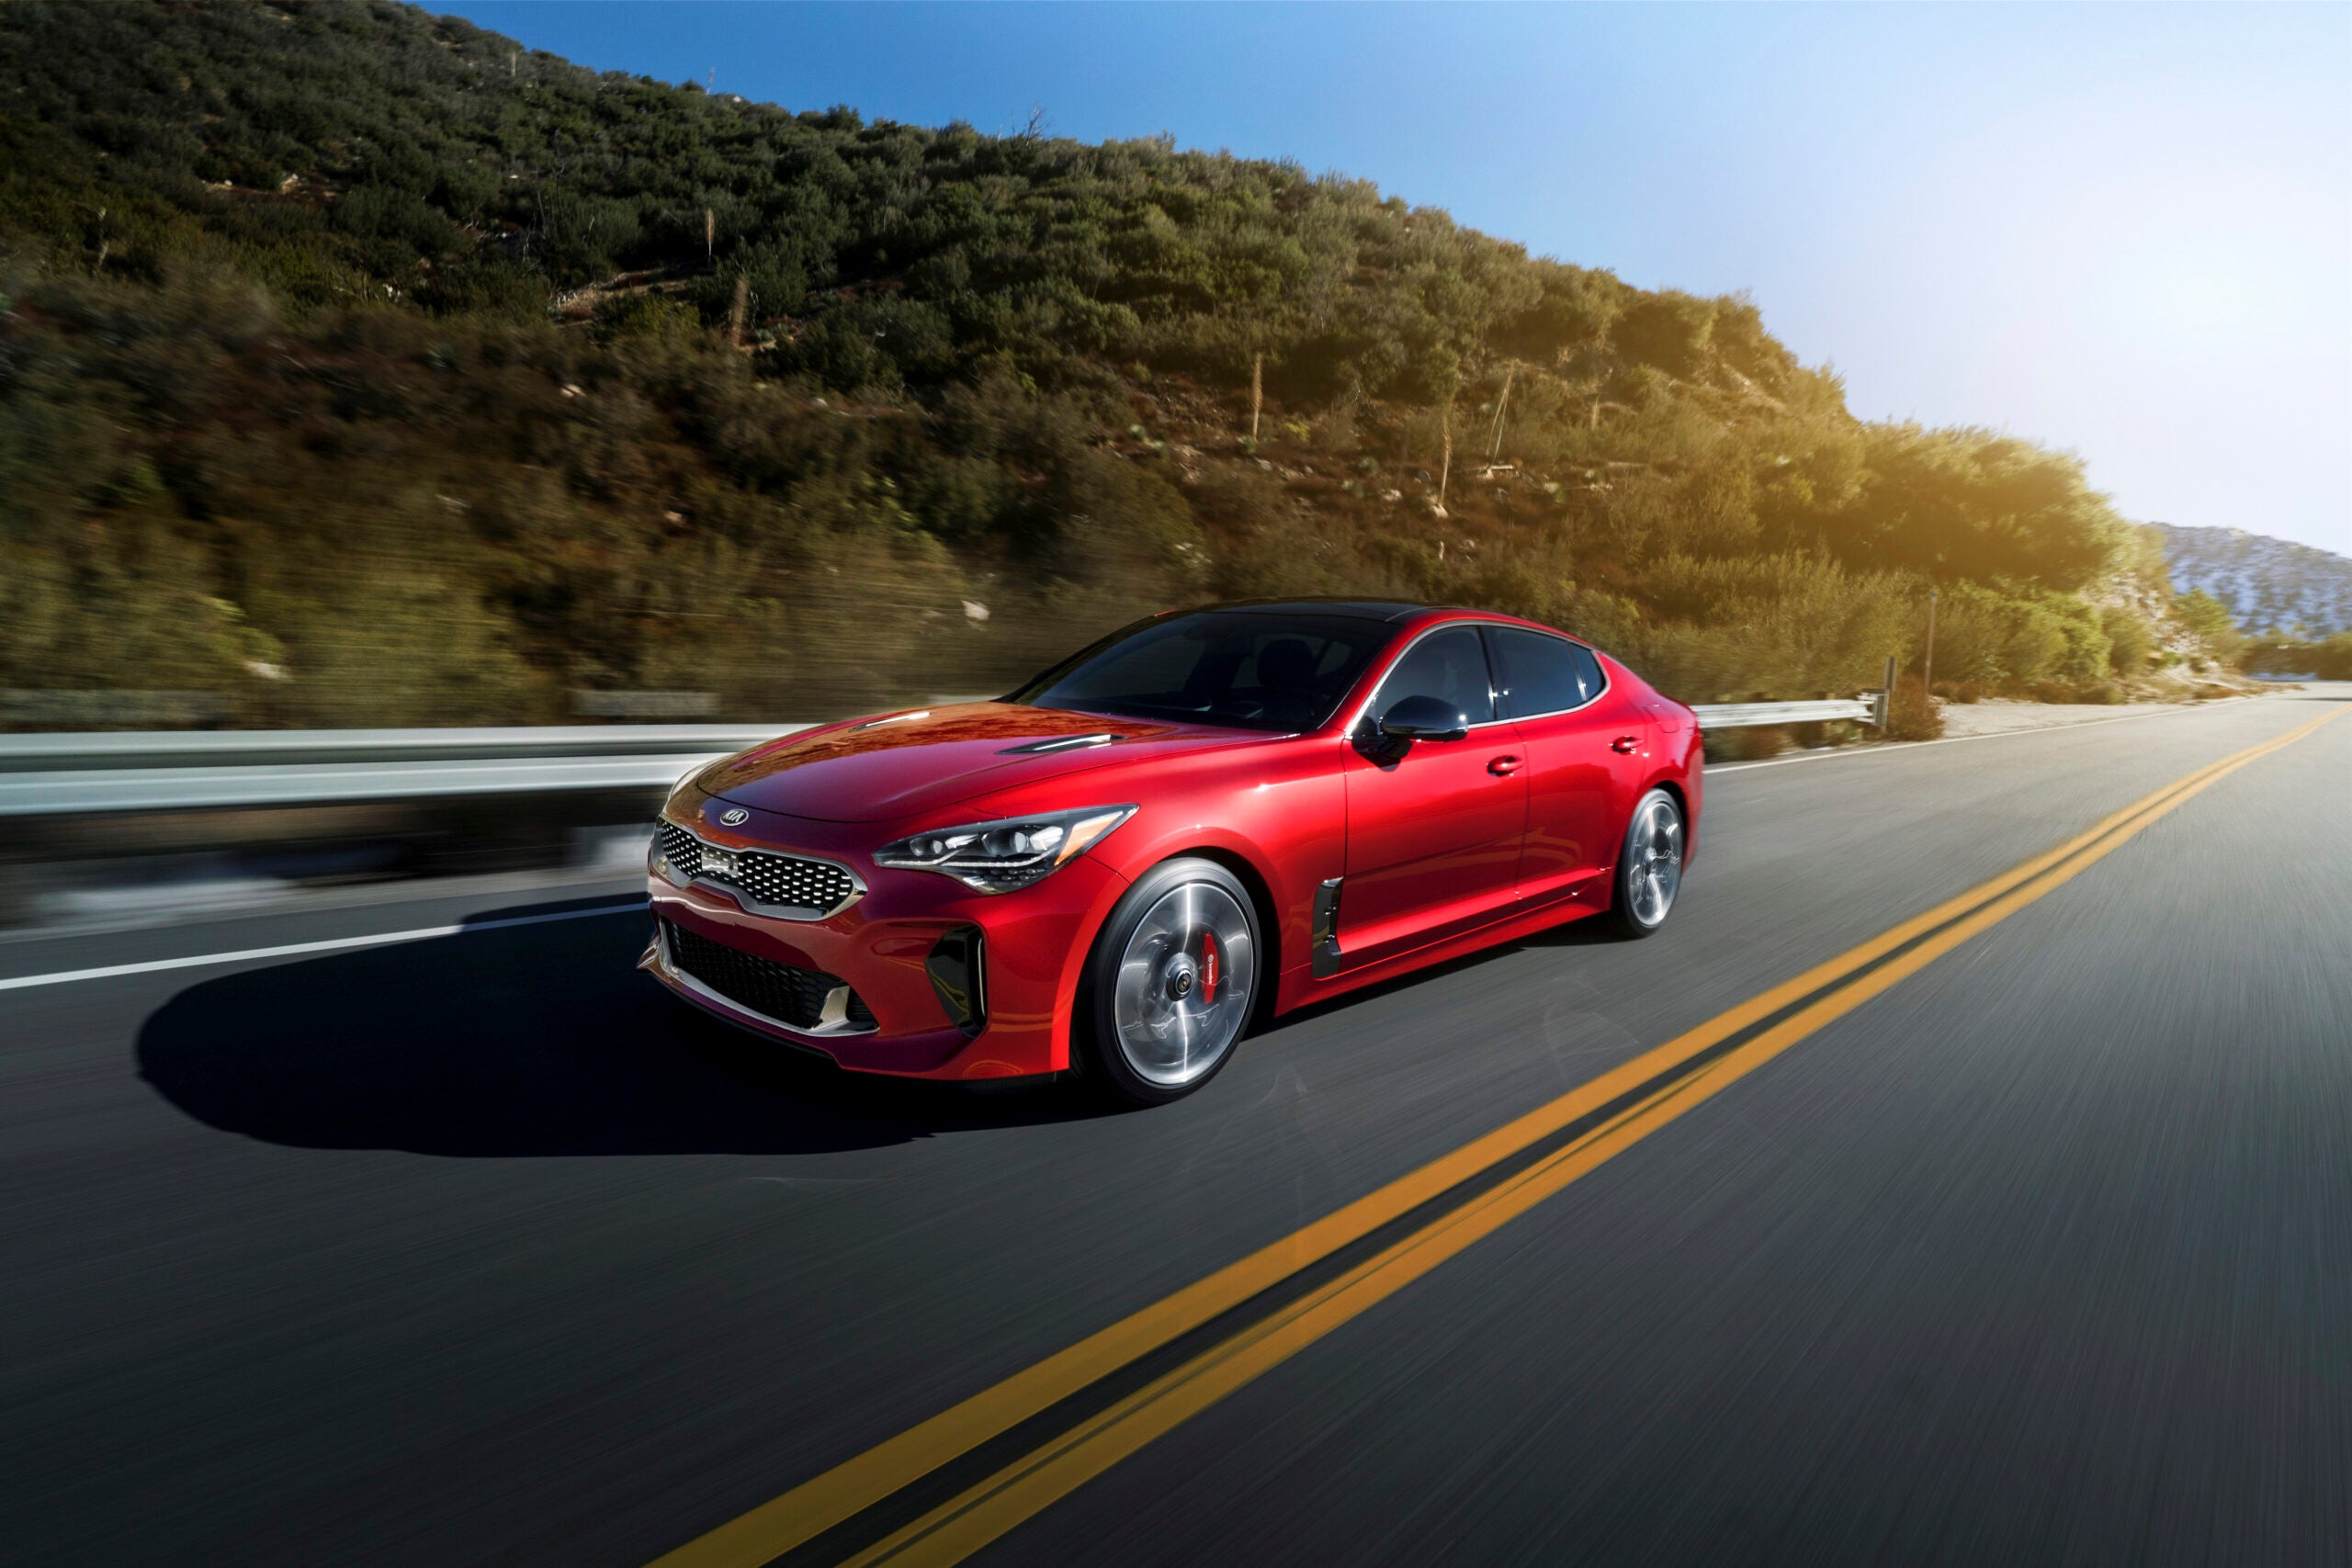 What the experts say about the 2018 Kia Stinger